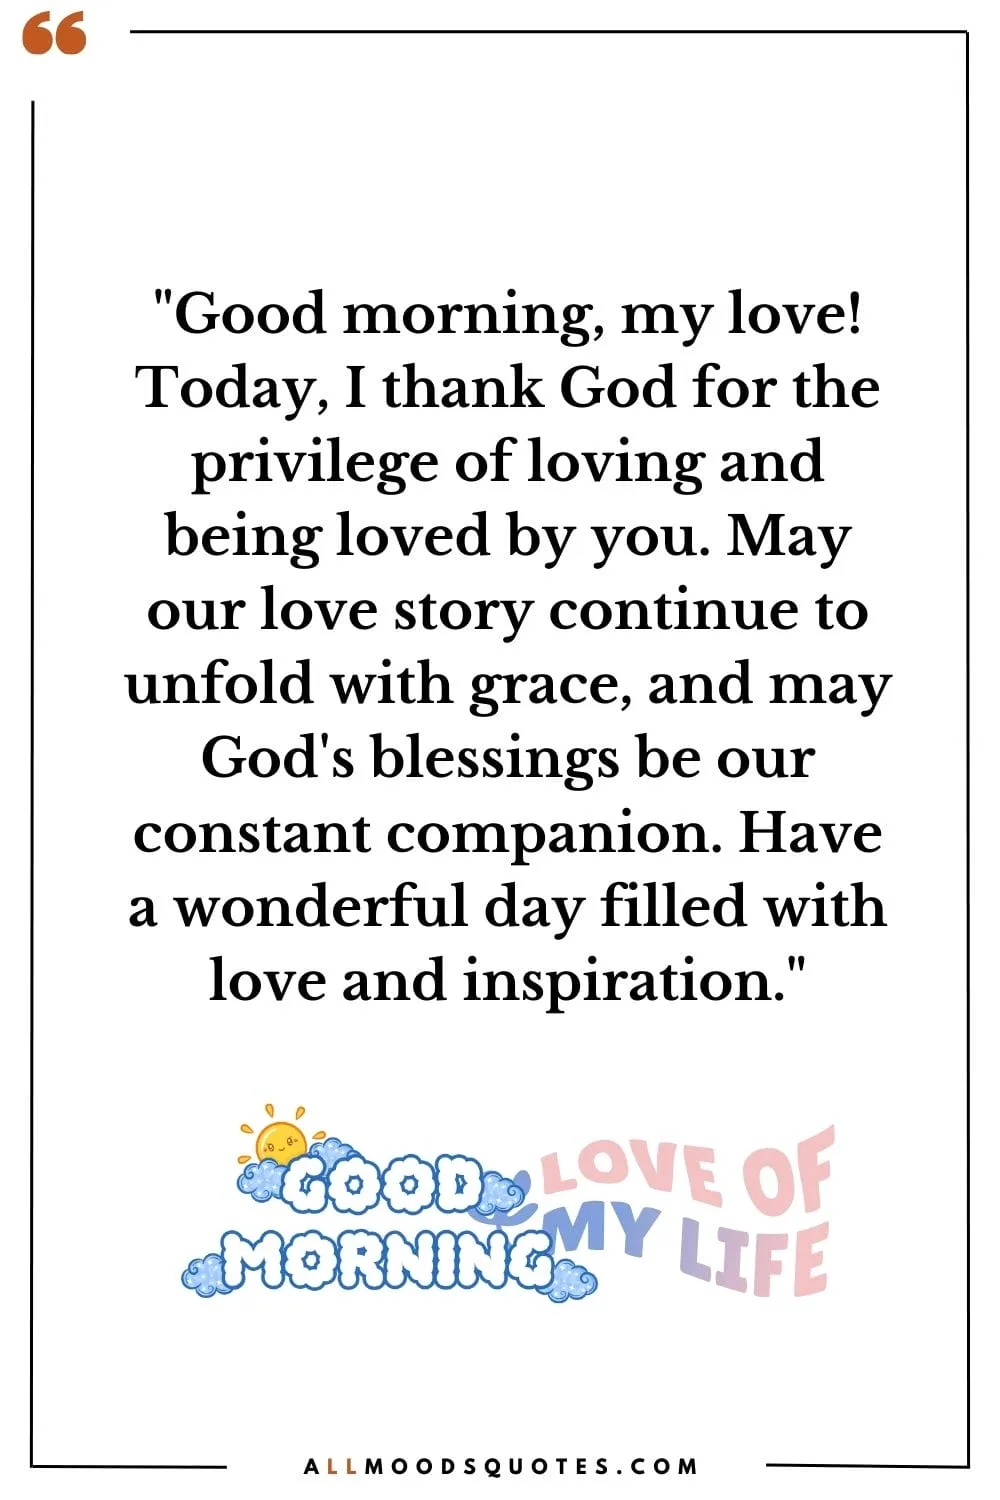 "Good morning, my love! Today, I thank God for the privilege of loving and being loved by you. May our love story continue to unfold with grace, and may God's blessings be our constant companion. Have a wonderful day filled with love and inspiration."